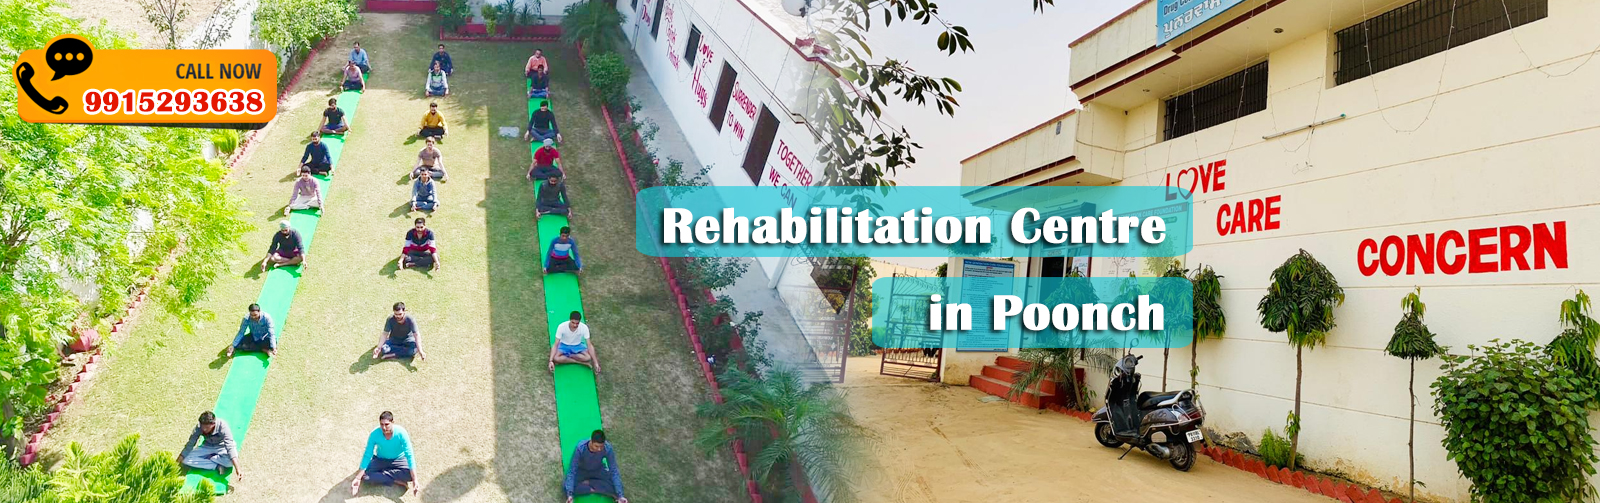 Rehabilitation Centre in Poonch